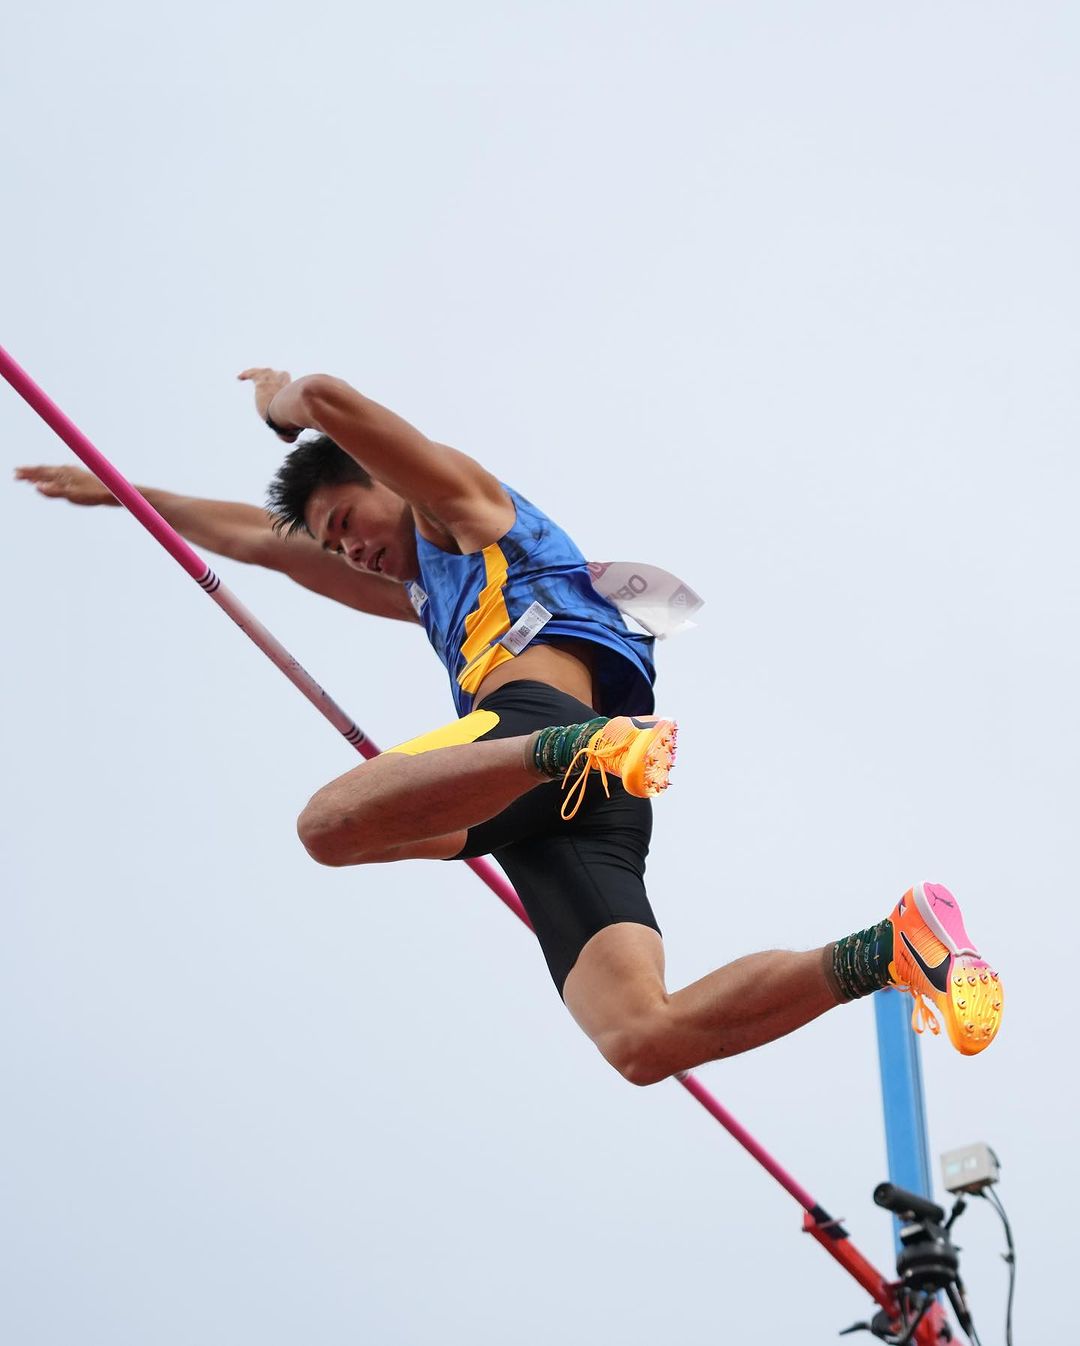 EJ Obiena reaches World No. 2 in the men's pole vault ranking